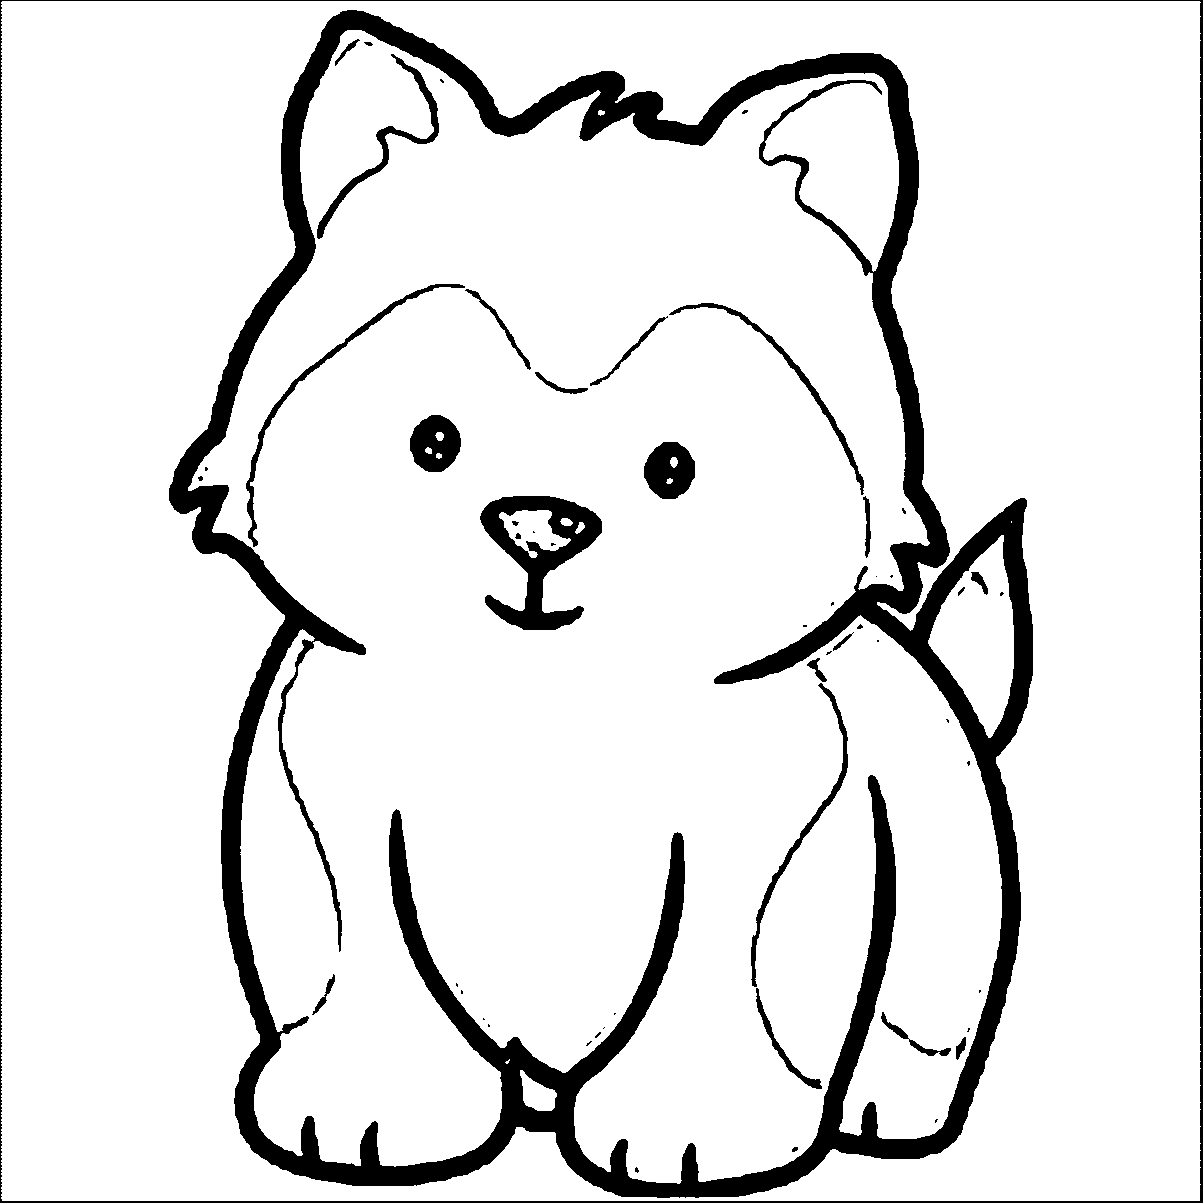 9 Cute Husky Coloring Pages Amazing Options for Kids & Adults